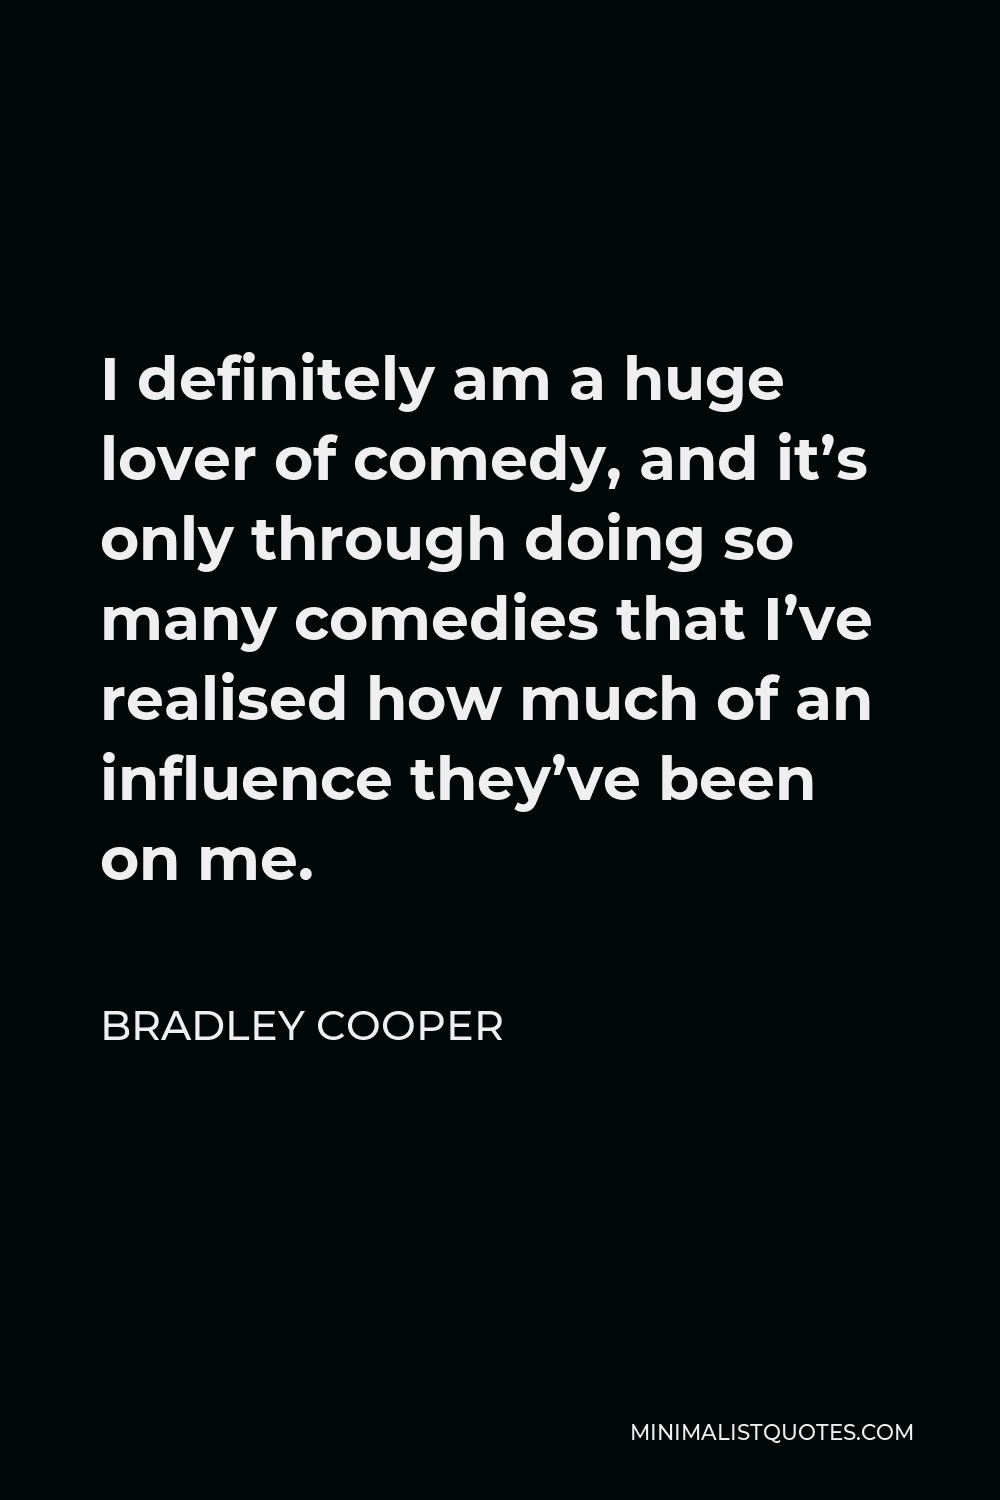 Bradley Cooper Quote - I definitely am a huge lover of comedy, and it’s only through doing so many comedies that I’ve realised how much of an influence they’ve been on me.